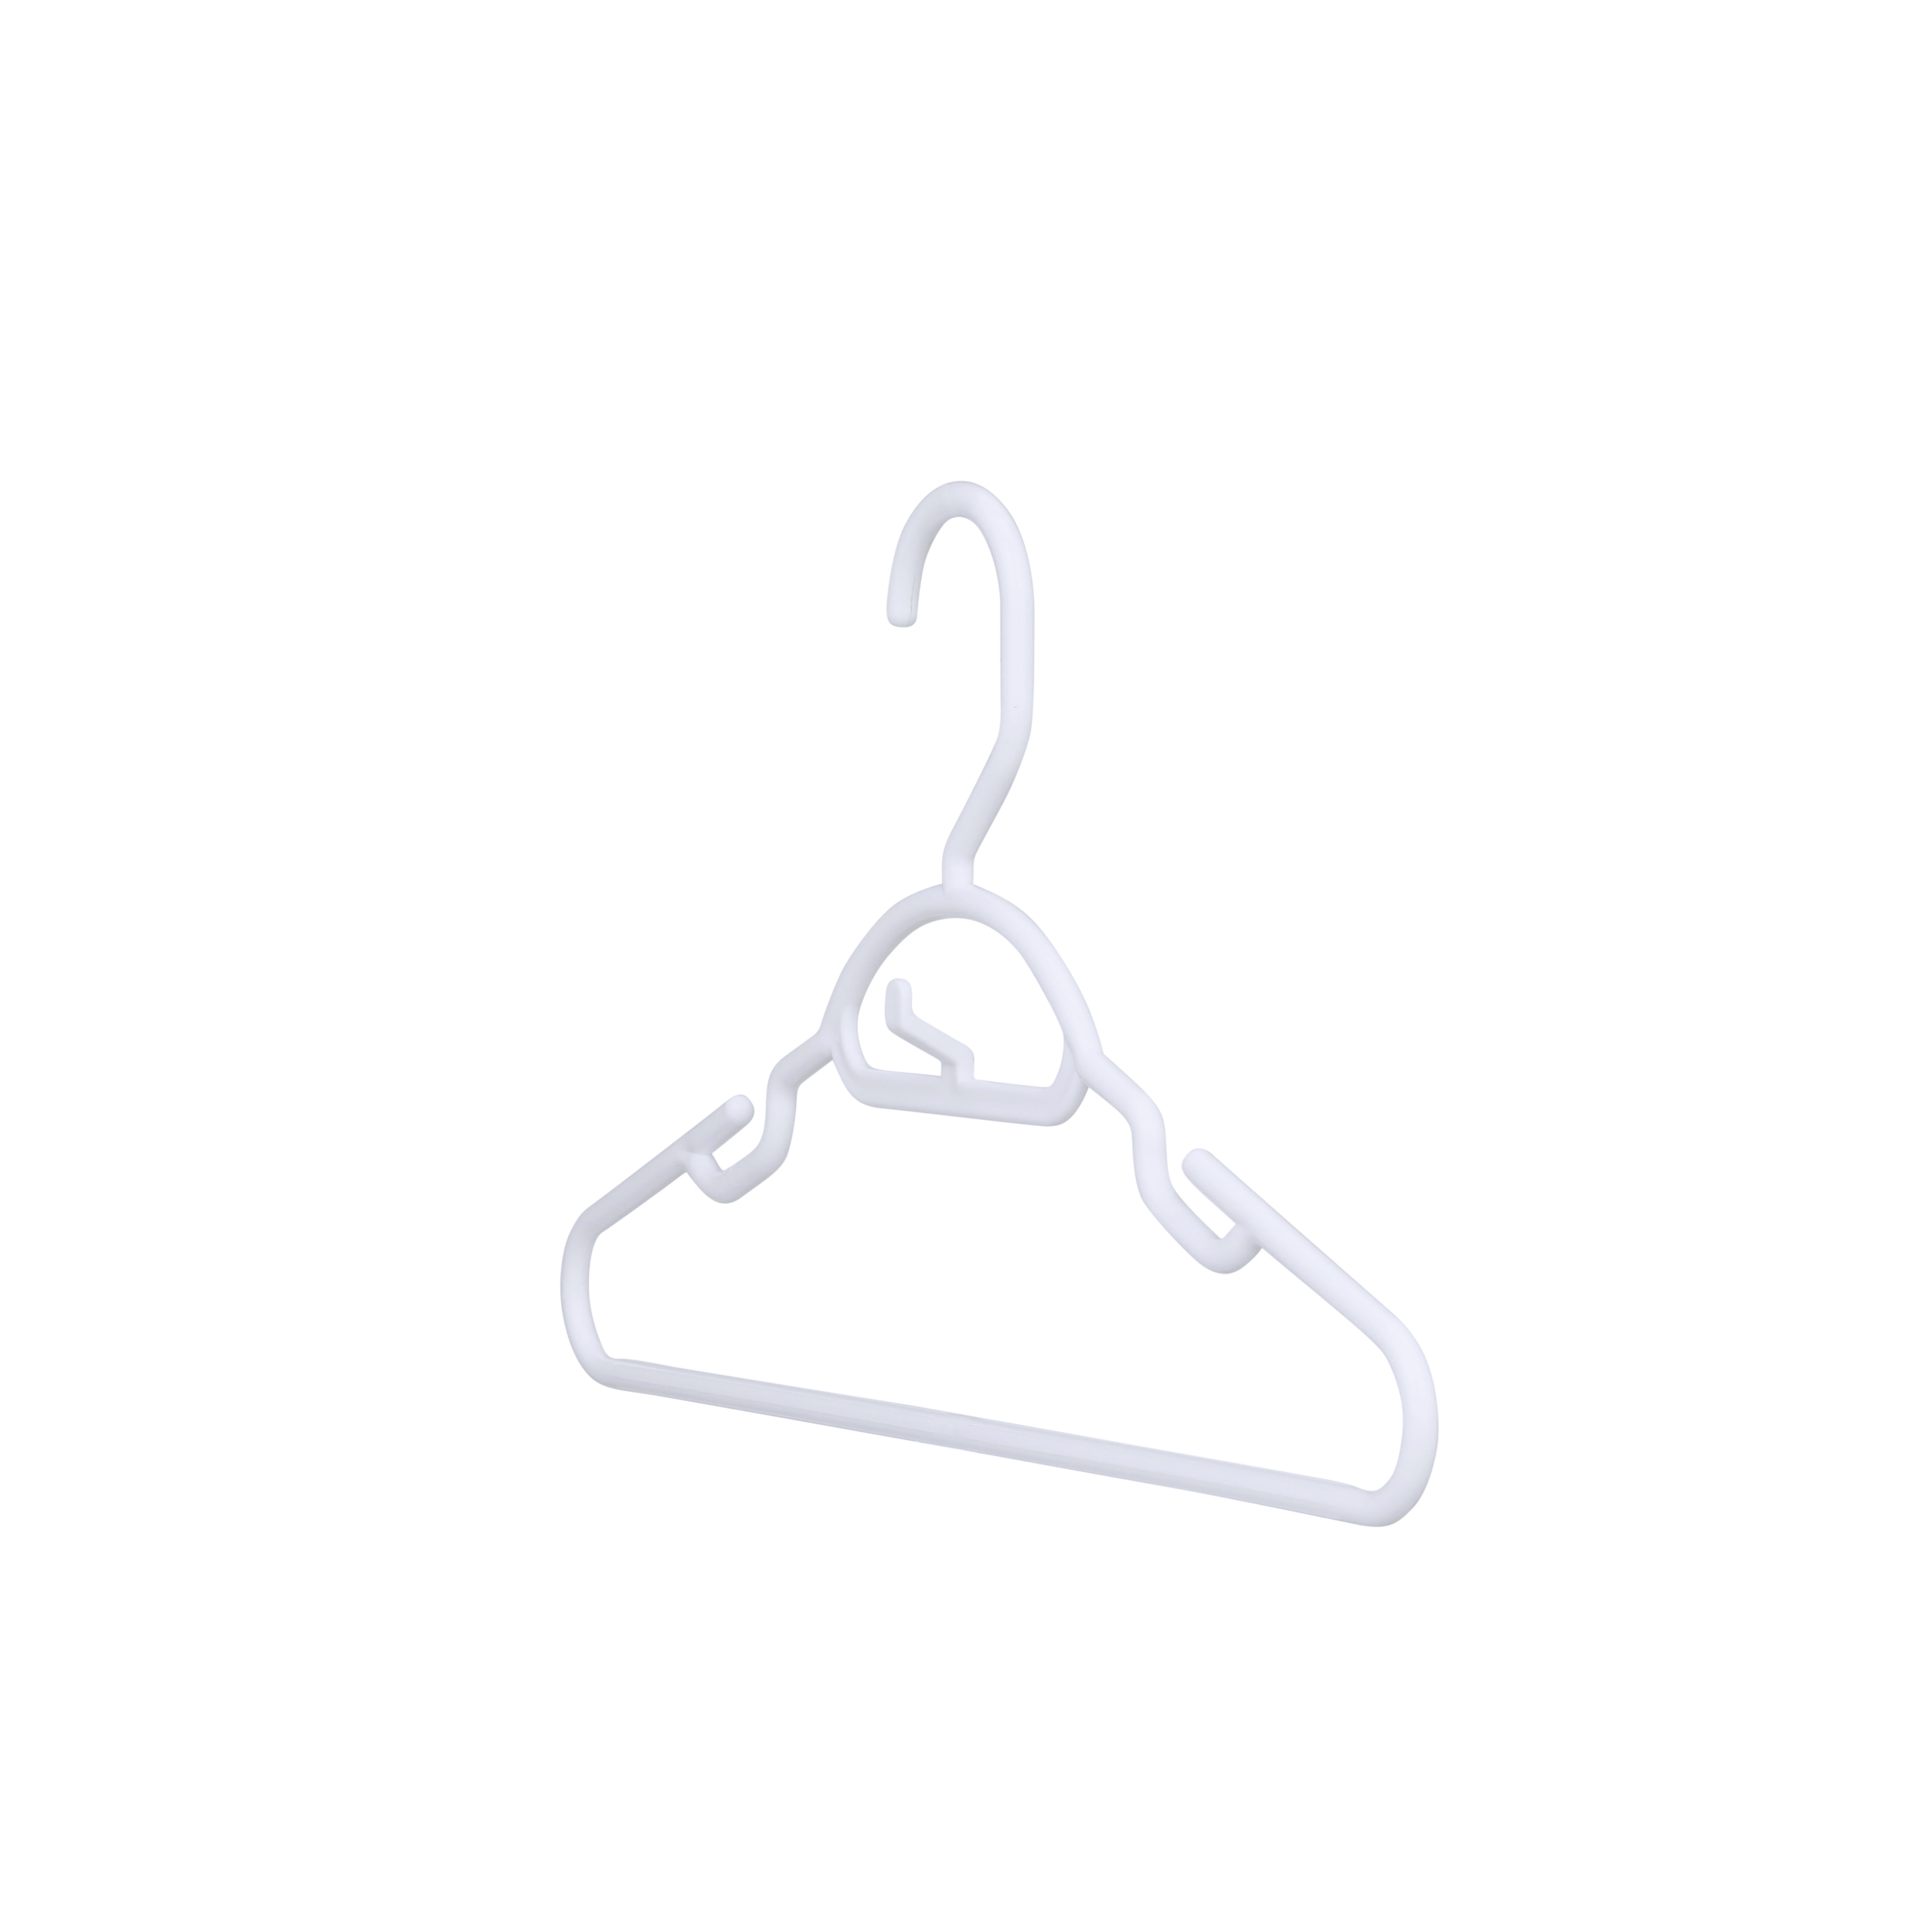 30 Pk Peach Youth Petite Plastic Hangers for Children Clothes Sizes 8 to 14, Petite, Teen, Preteen, Junior, 30 Pack (peach)